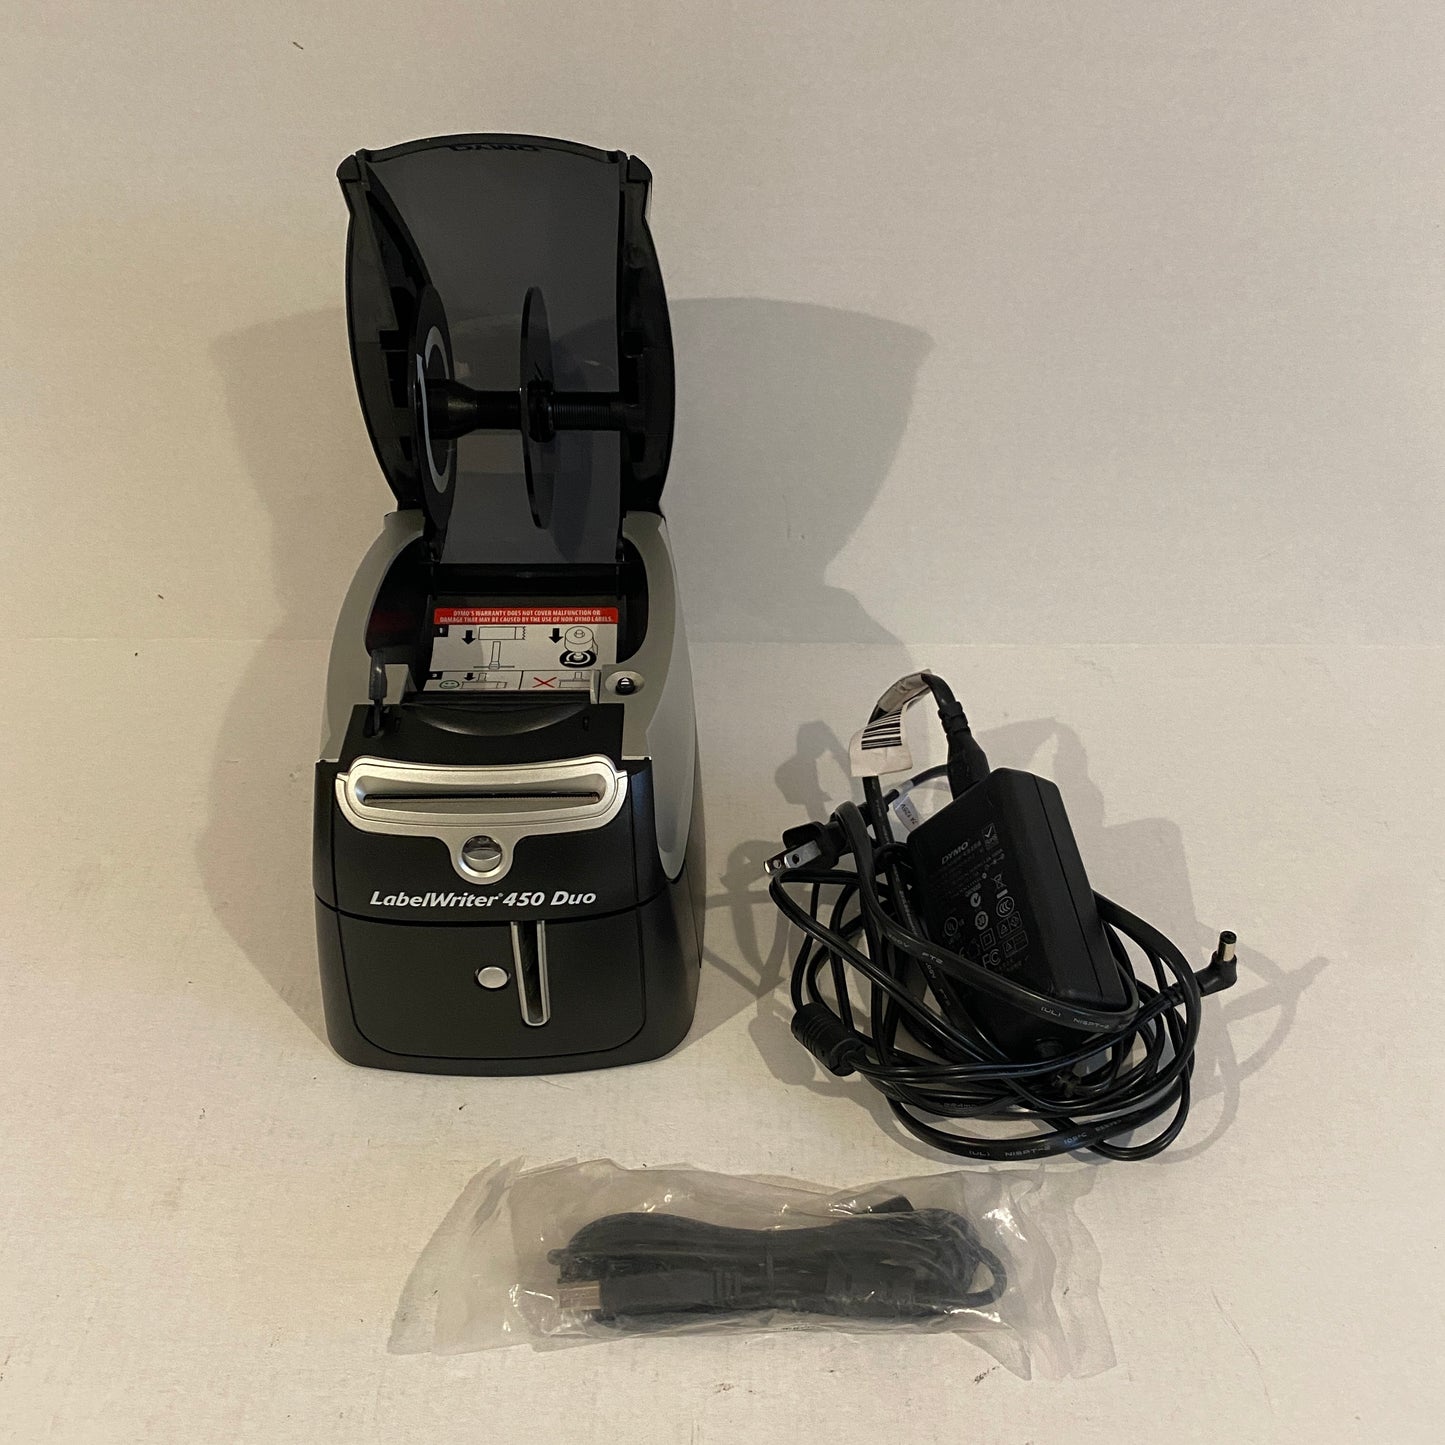 Dymo LabelWriter 450 Duo Label Thermal Printer - Tested, Working